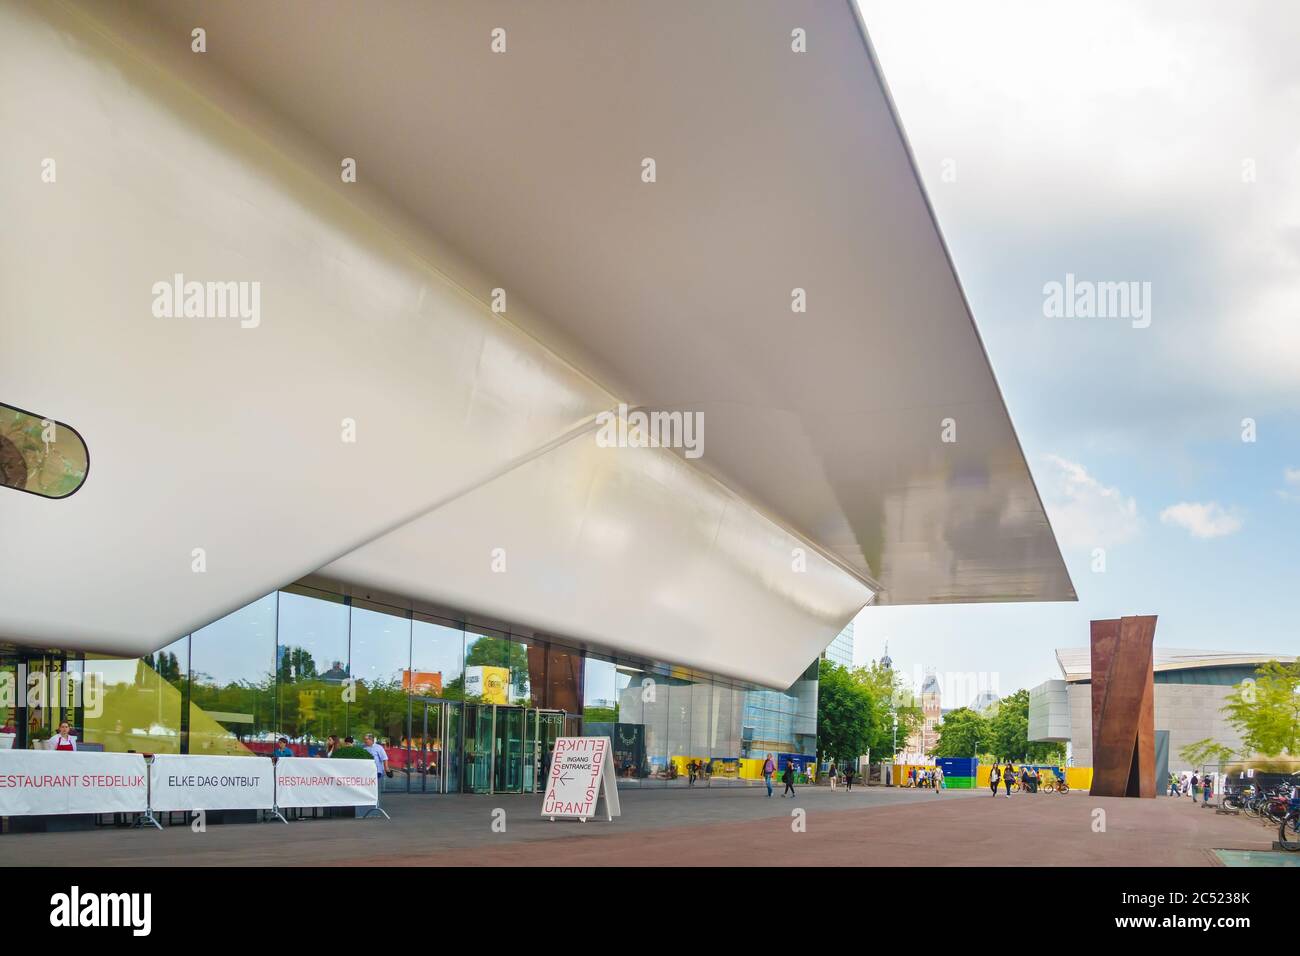 AMSTERDAM, THE NETHERLANDS - JUNE 26, 2014: Entrance of the famous Stedelijk Musem in Amsterdam located in the museum park, The Netherlands Stock Photo